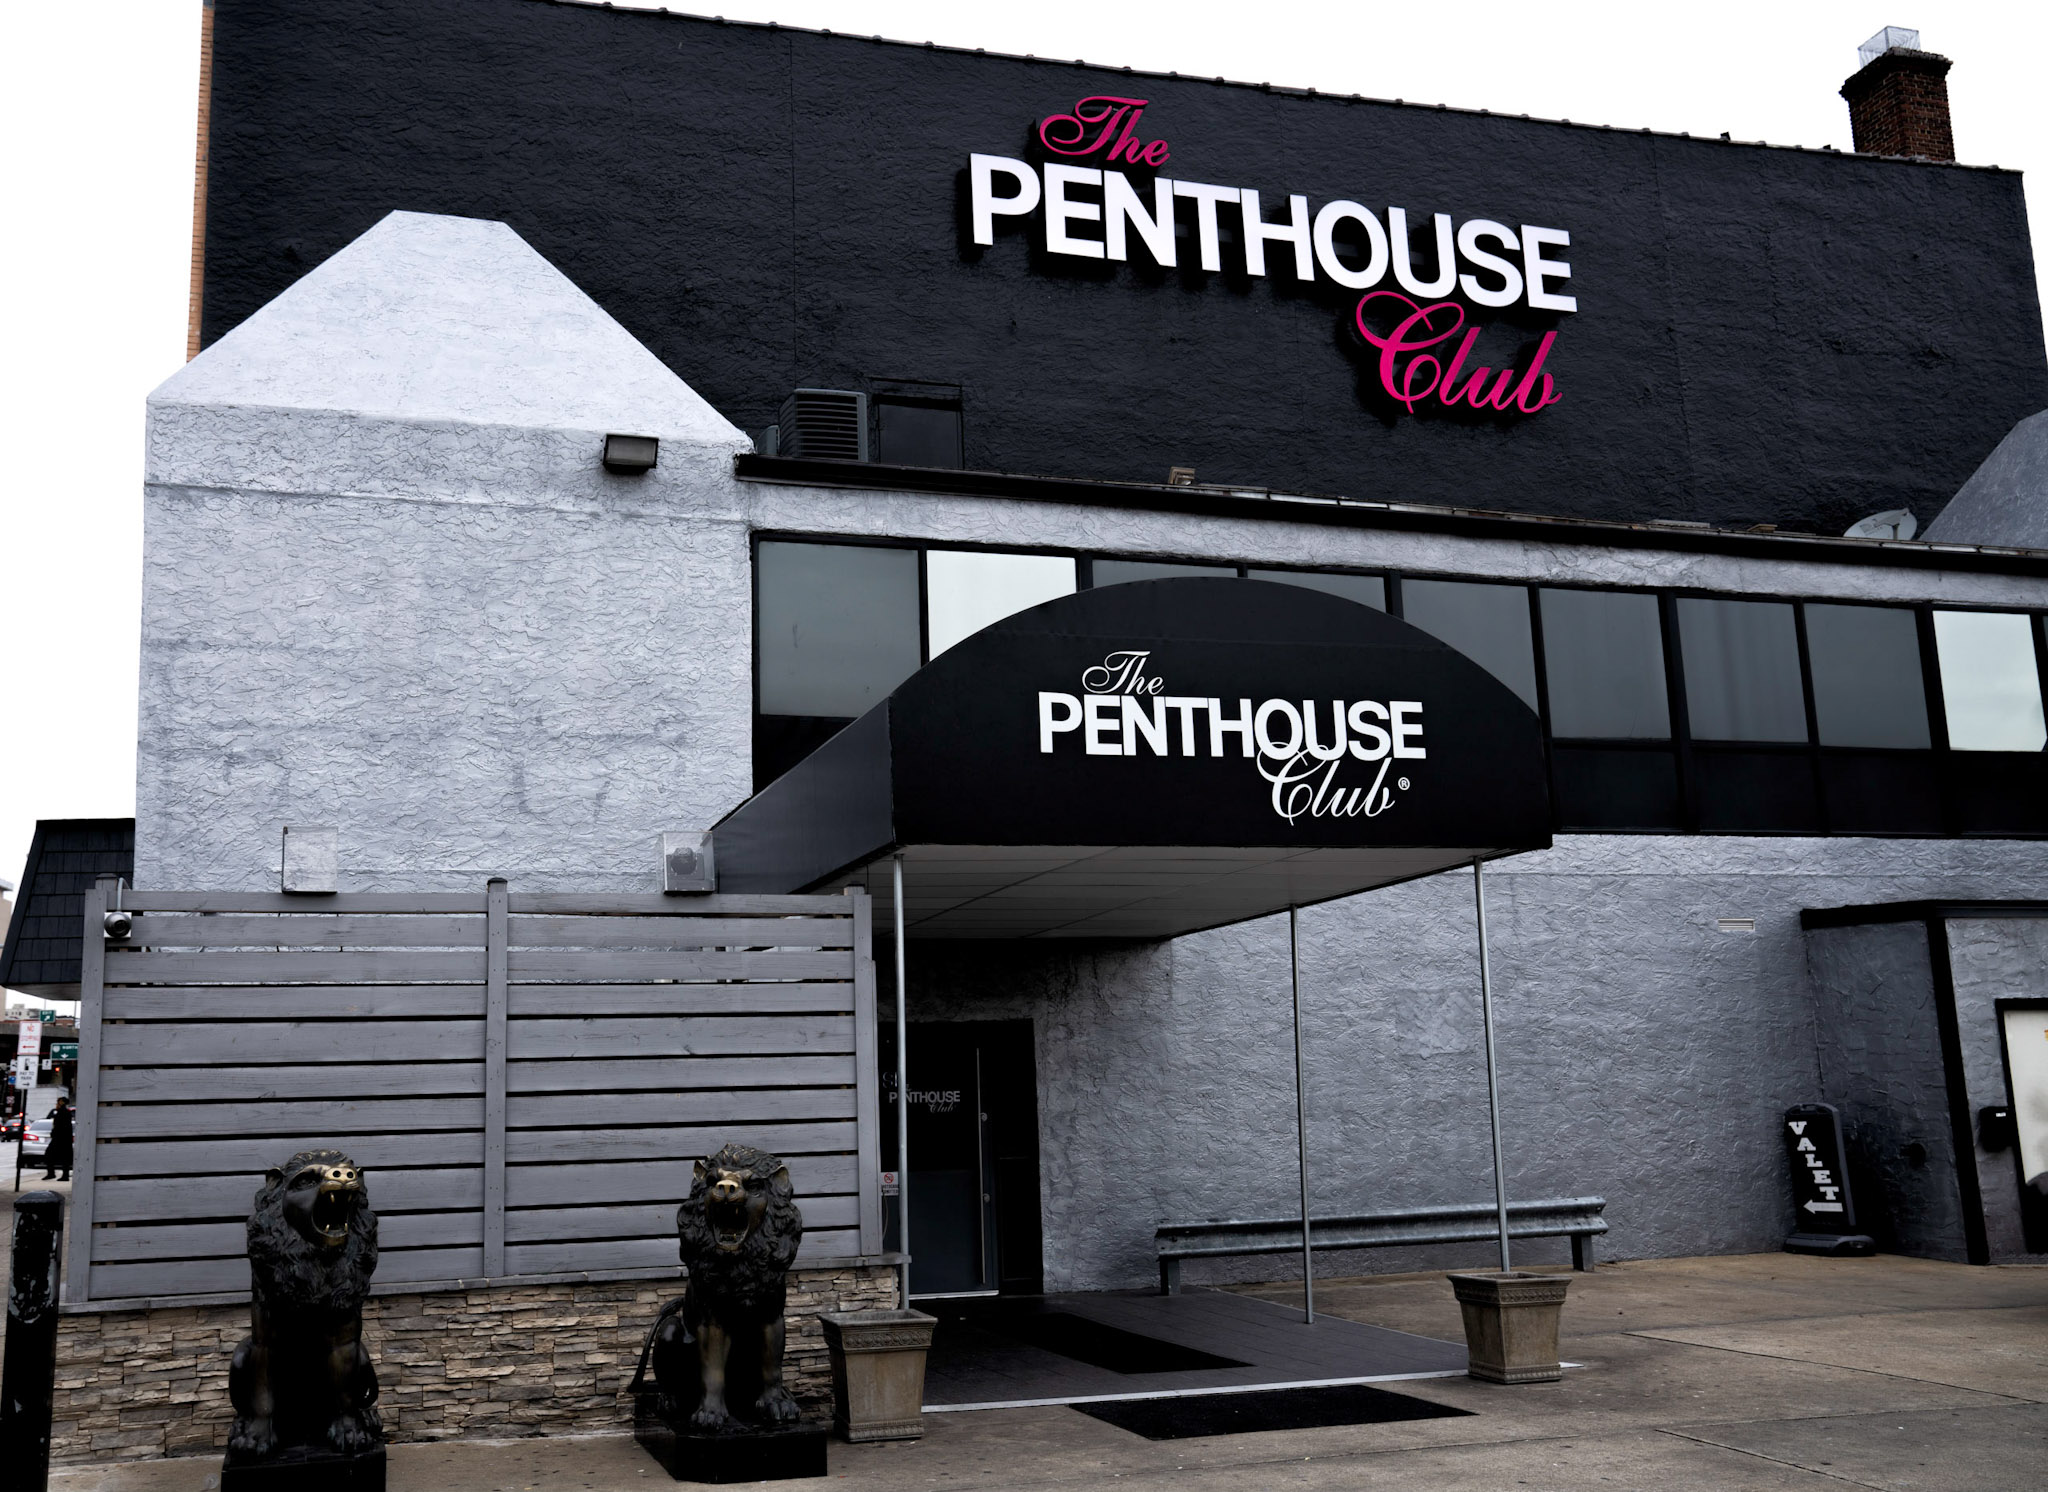 Exterior of The Penthouse Club Baltimore